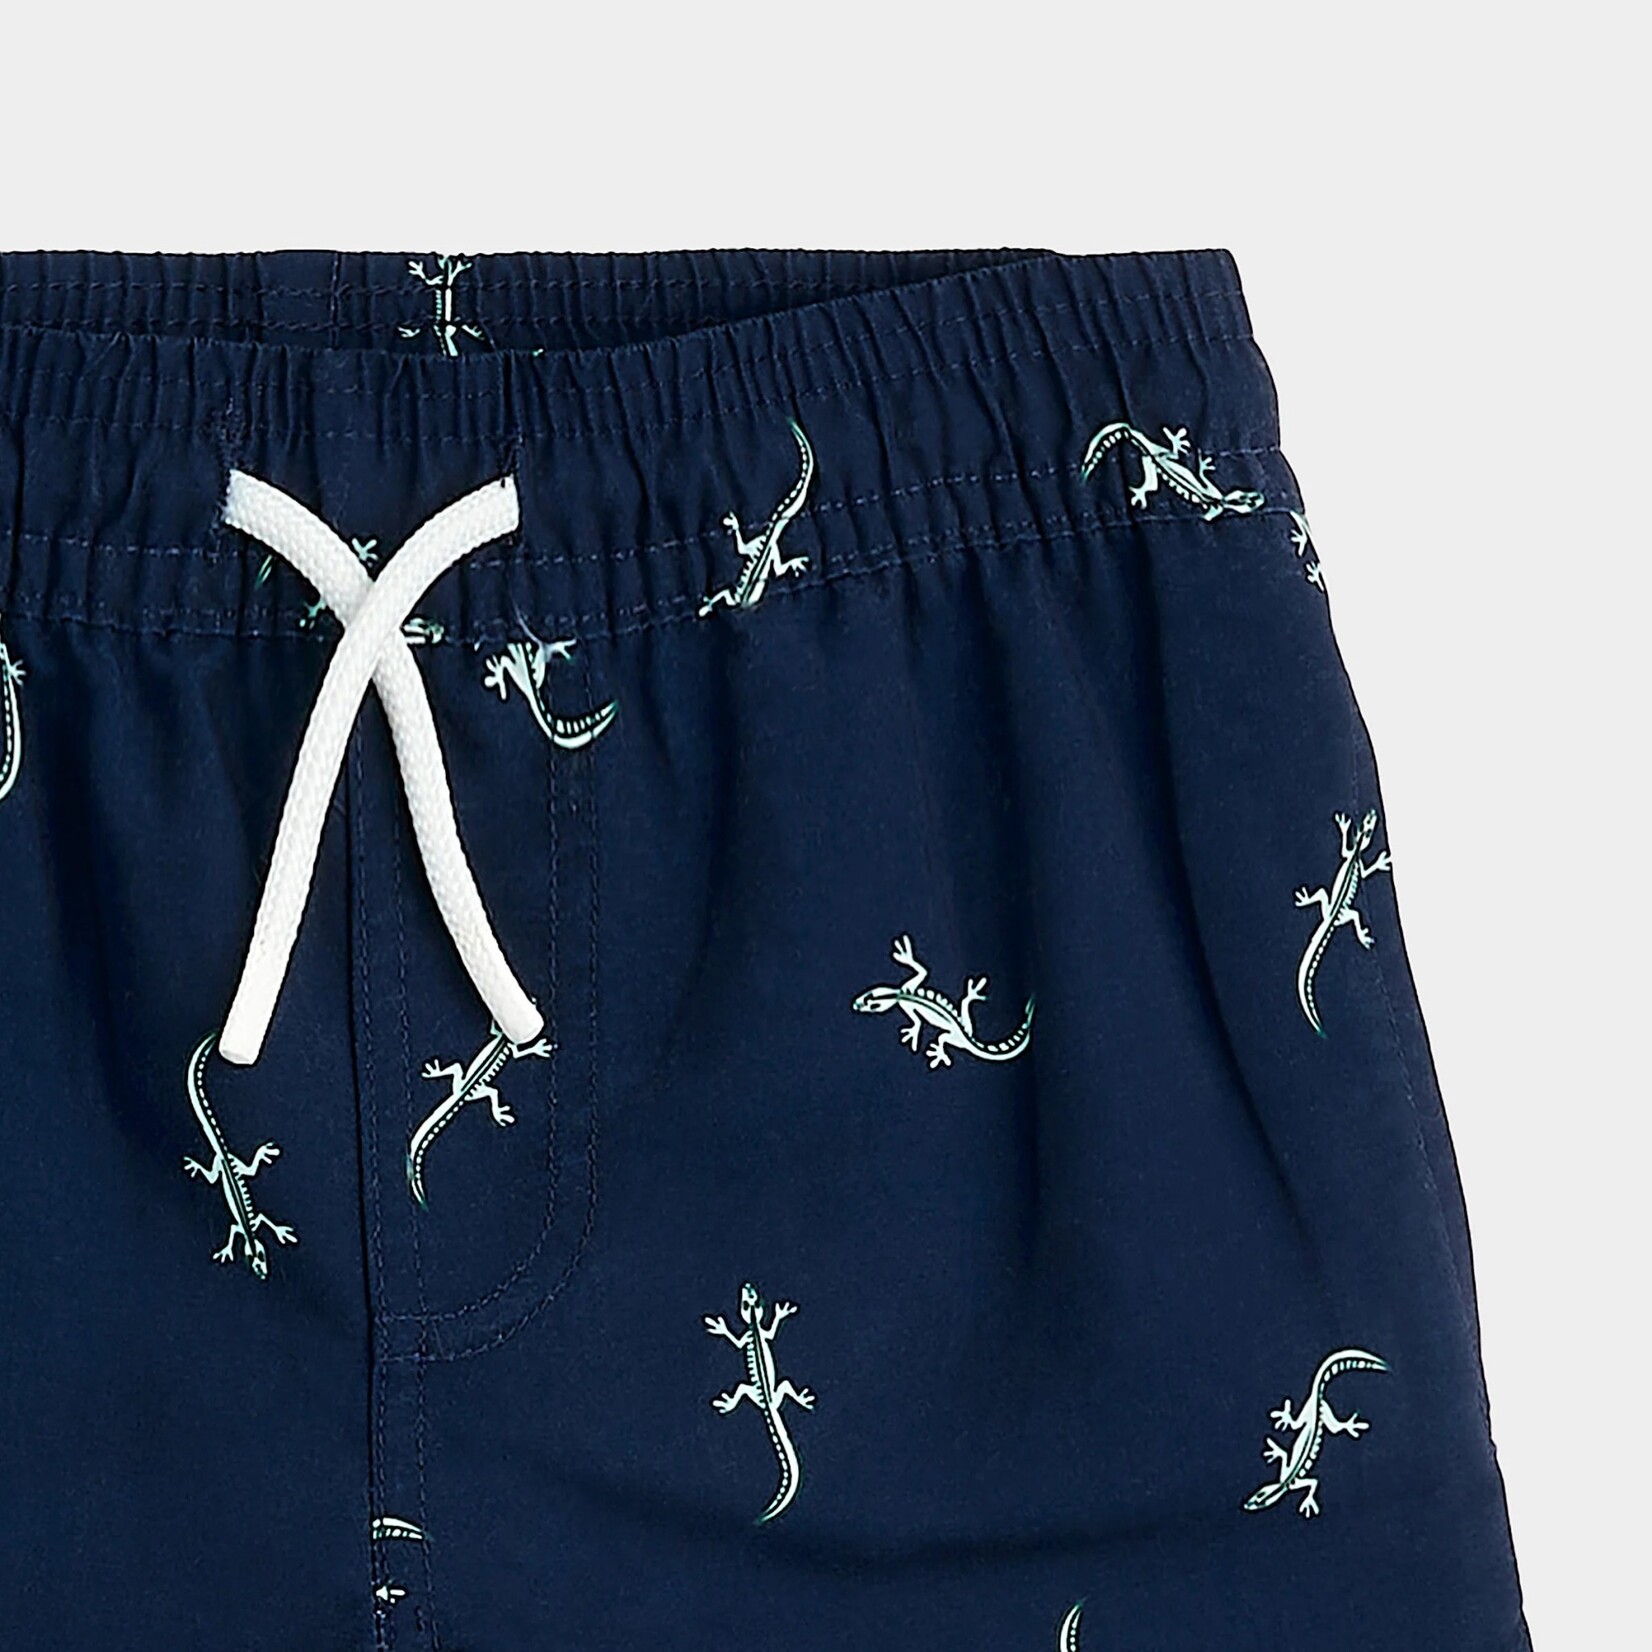 Miles the label MILES THE LABEL- Navy Boardshort Swimsuit with Gecko Print